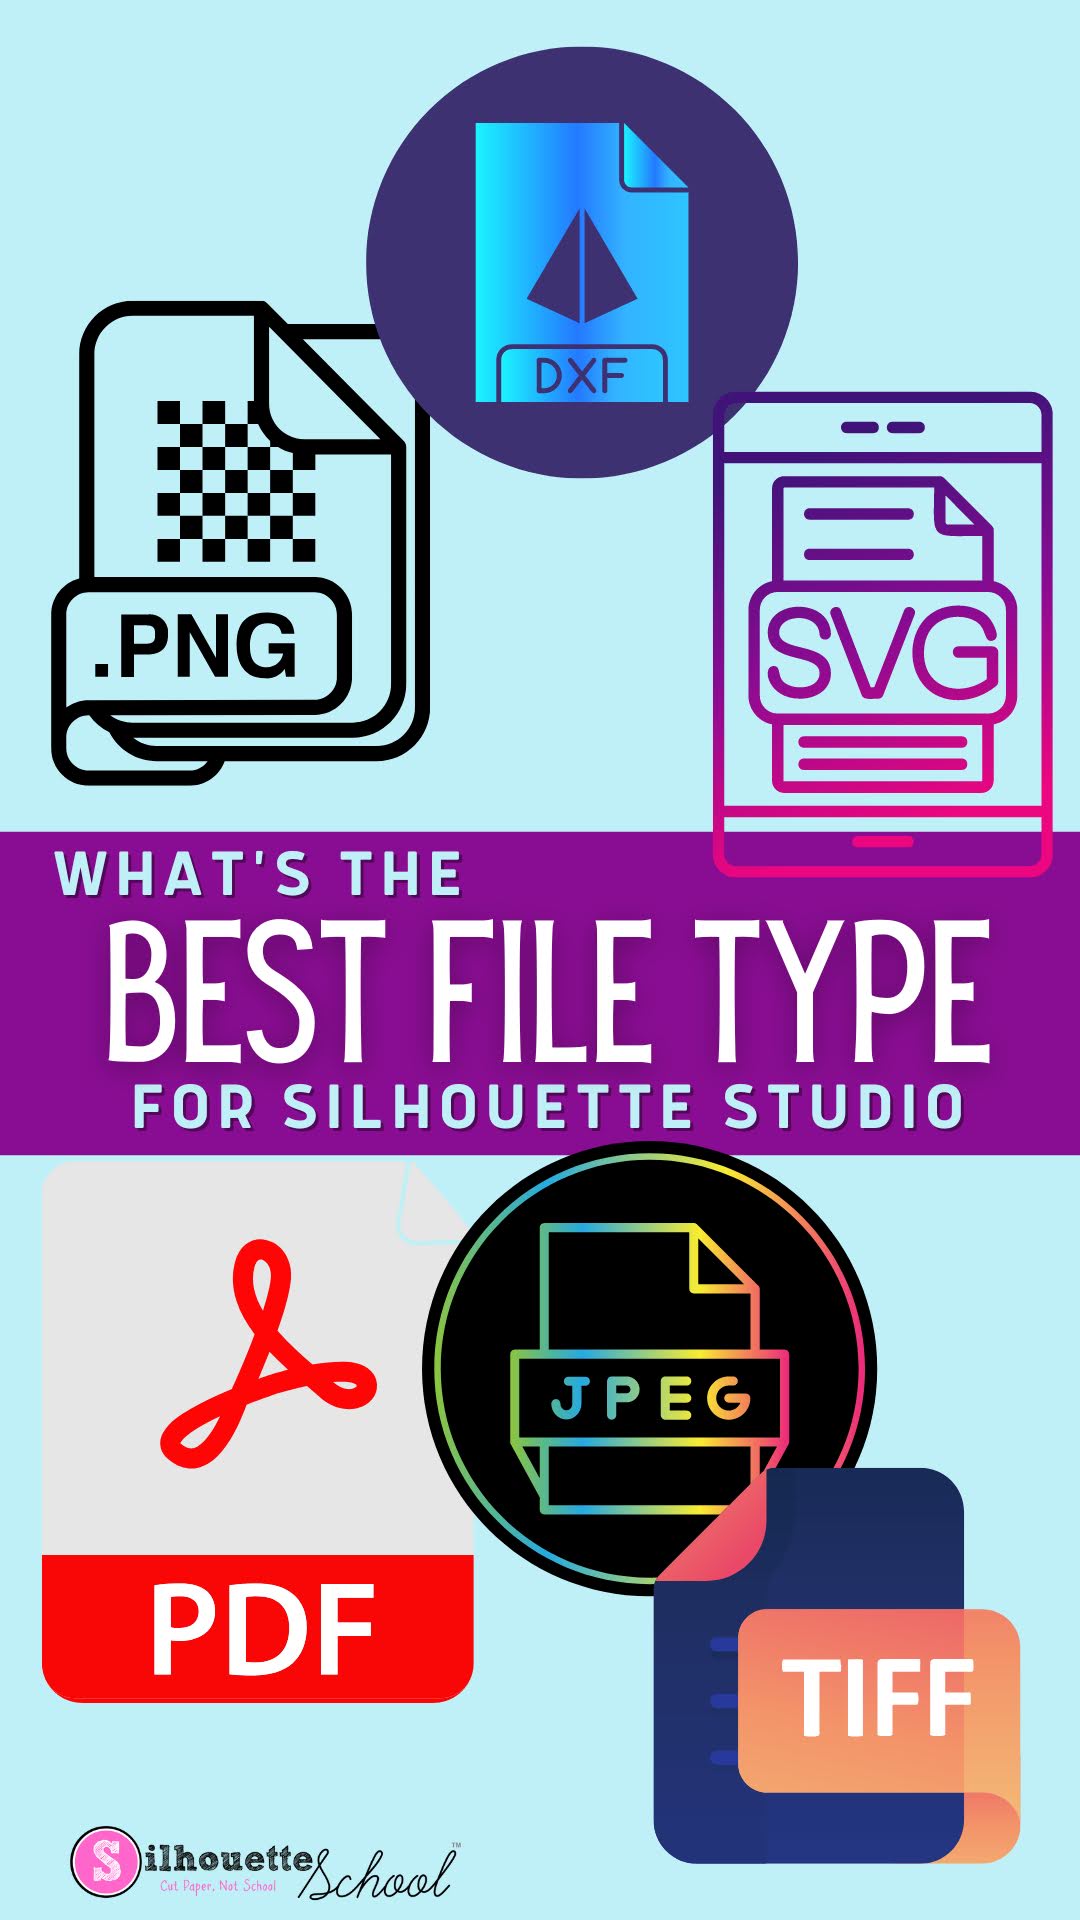 What Is the Best File Type for Silhouette Studio? - Silhouette School